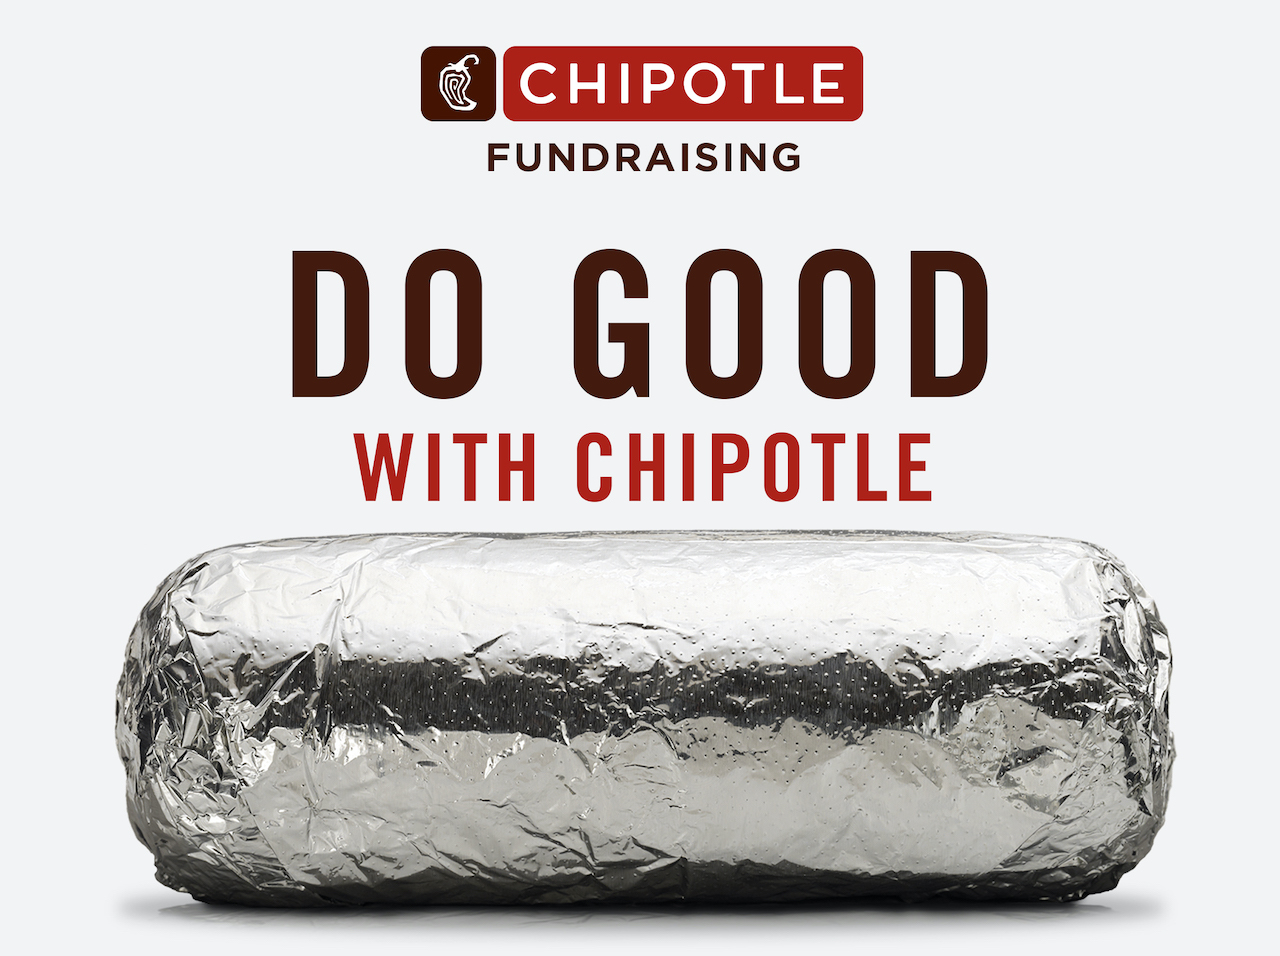 How to Fundraise with Chipotle | Chipotle Community Blog